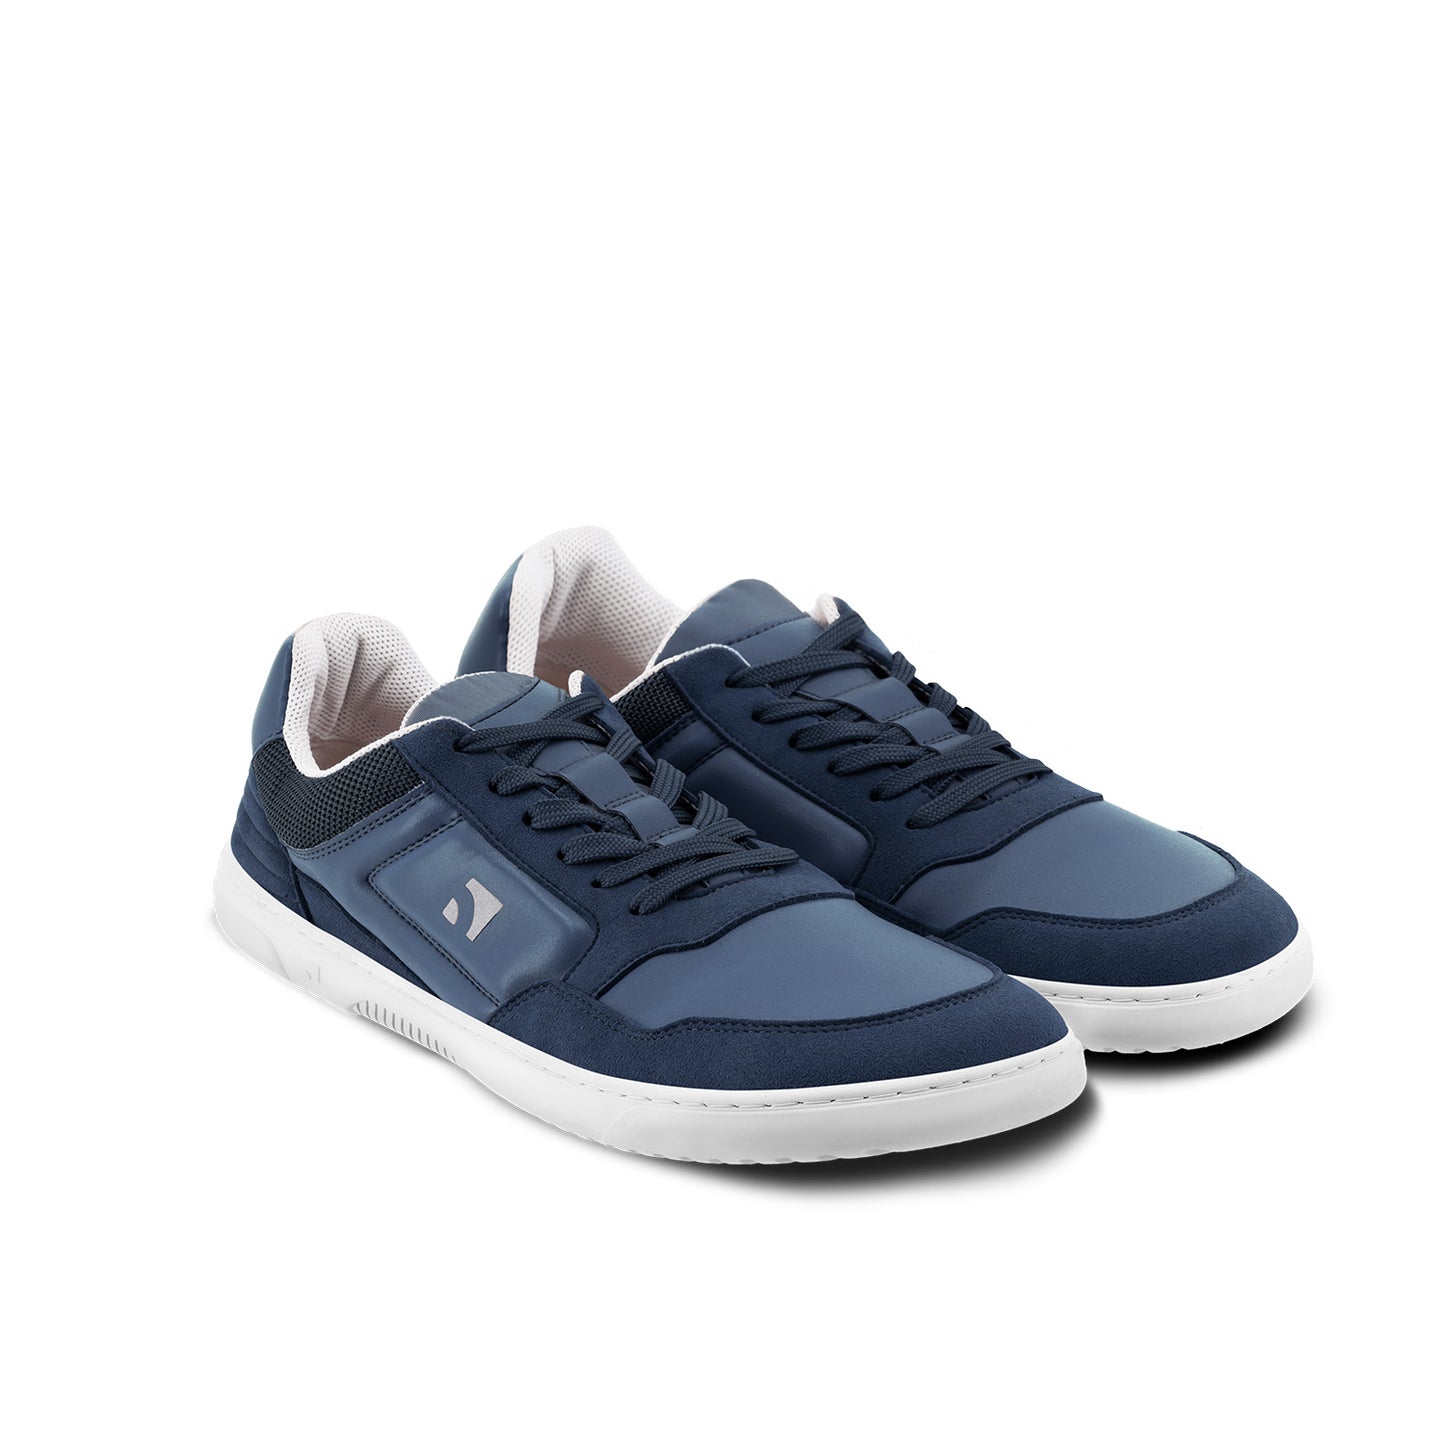 ["Lift your urban street style with Barebarics Axiom - featuring a padded design and stylish stitching for that classy casual look. Being incredibly comfortable and effortlessly combinable with various casual outfits, they can quickly become your go-to pair of barefoot sneakers."]